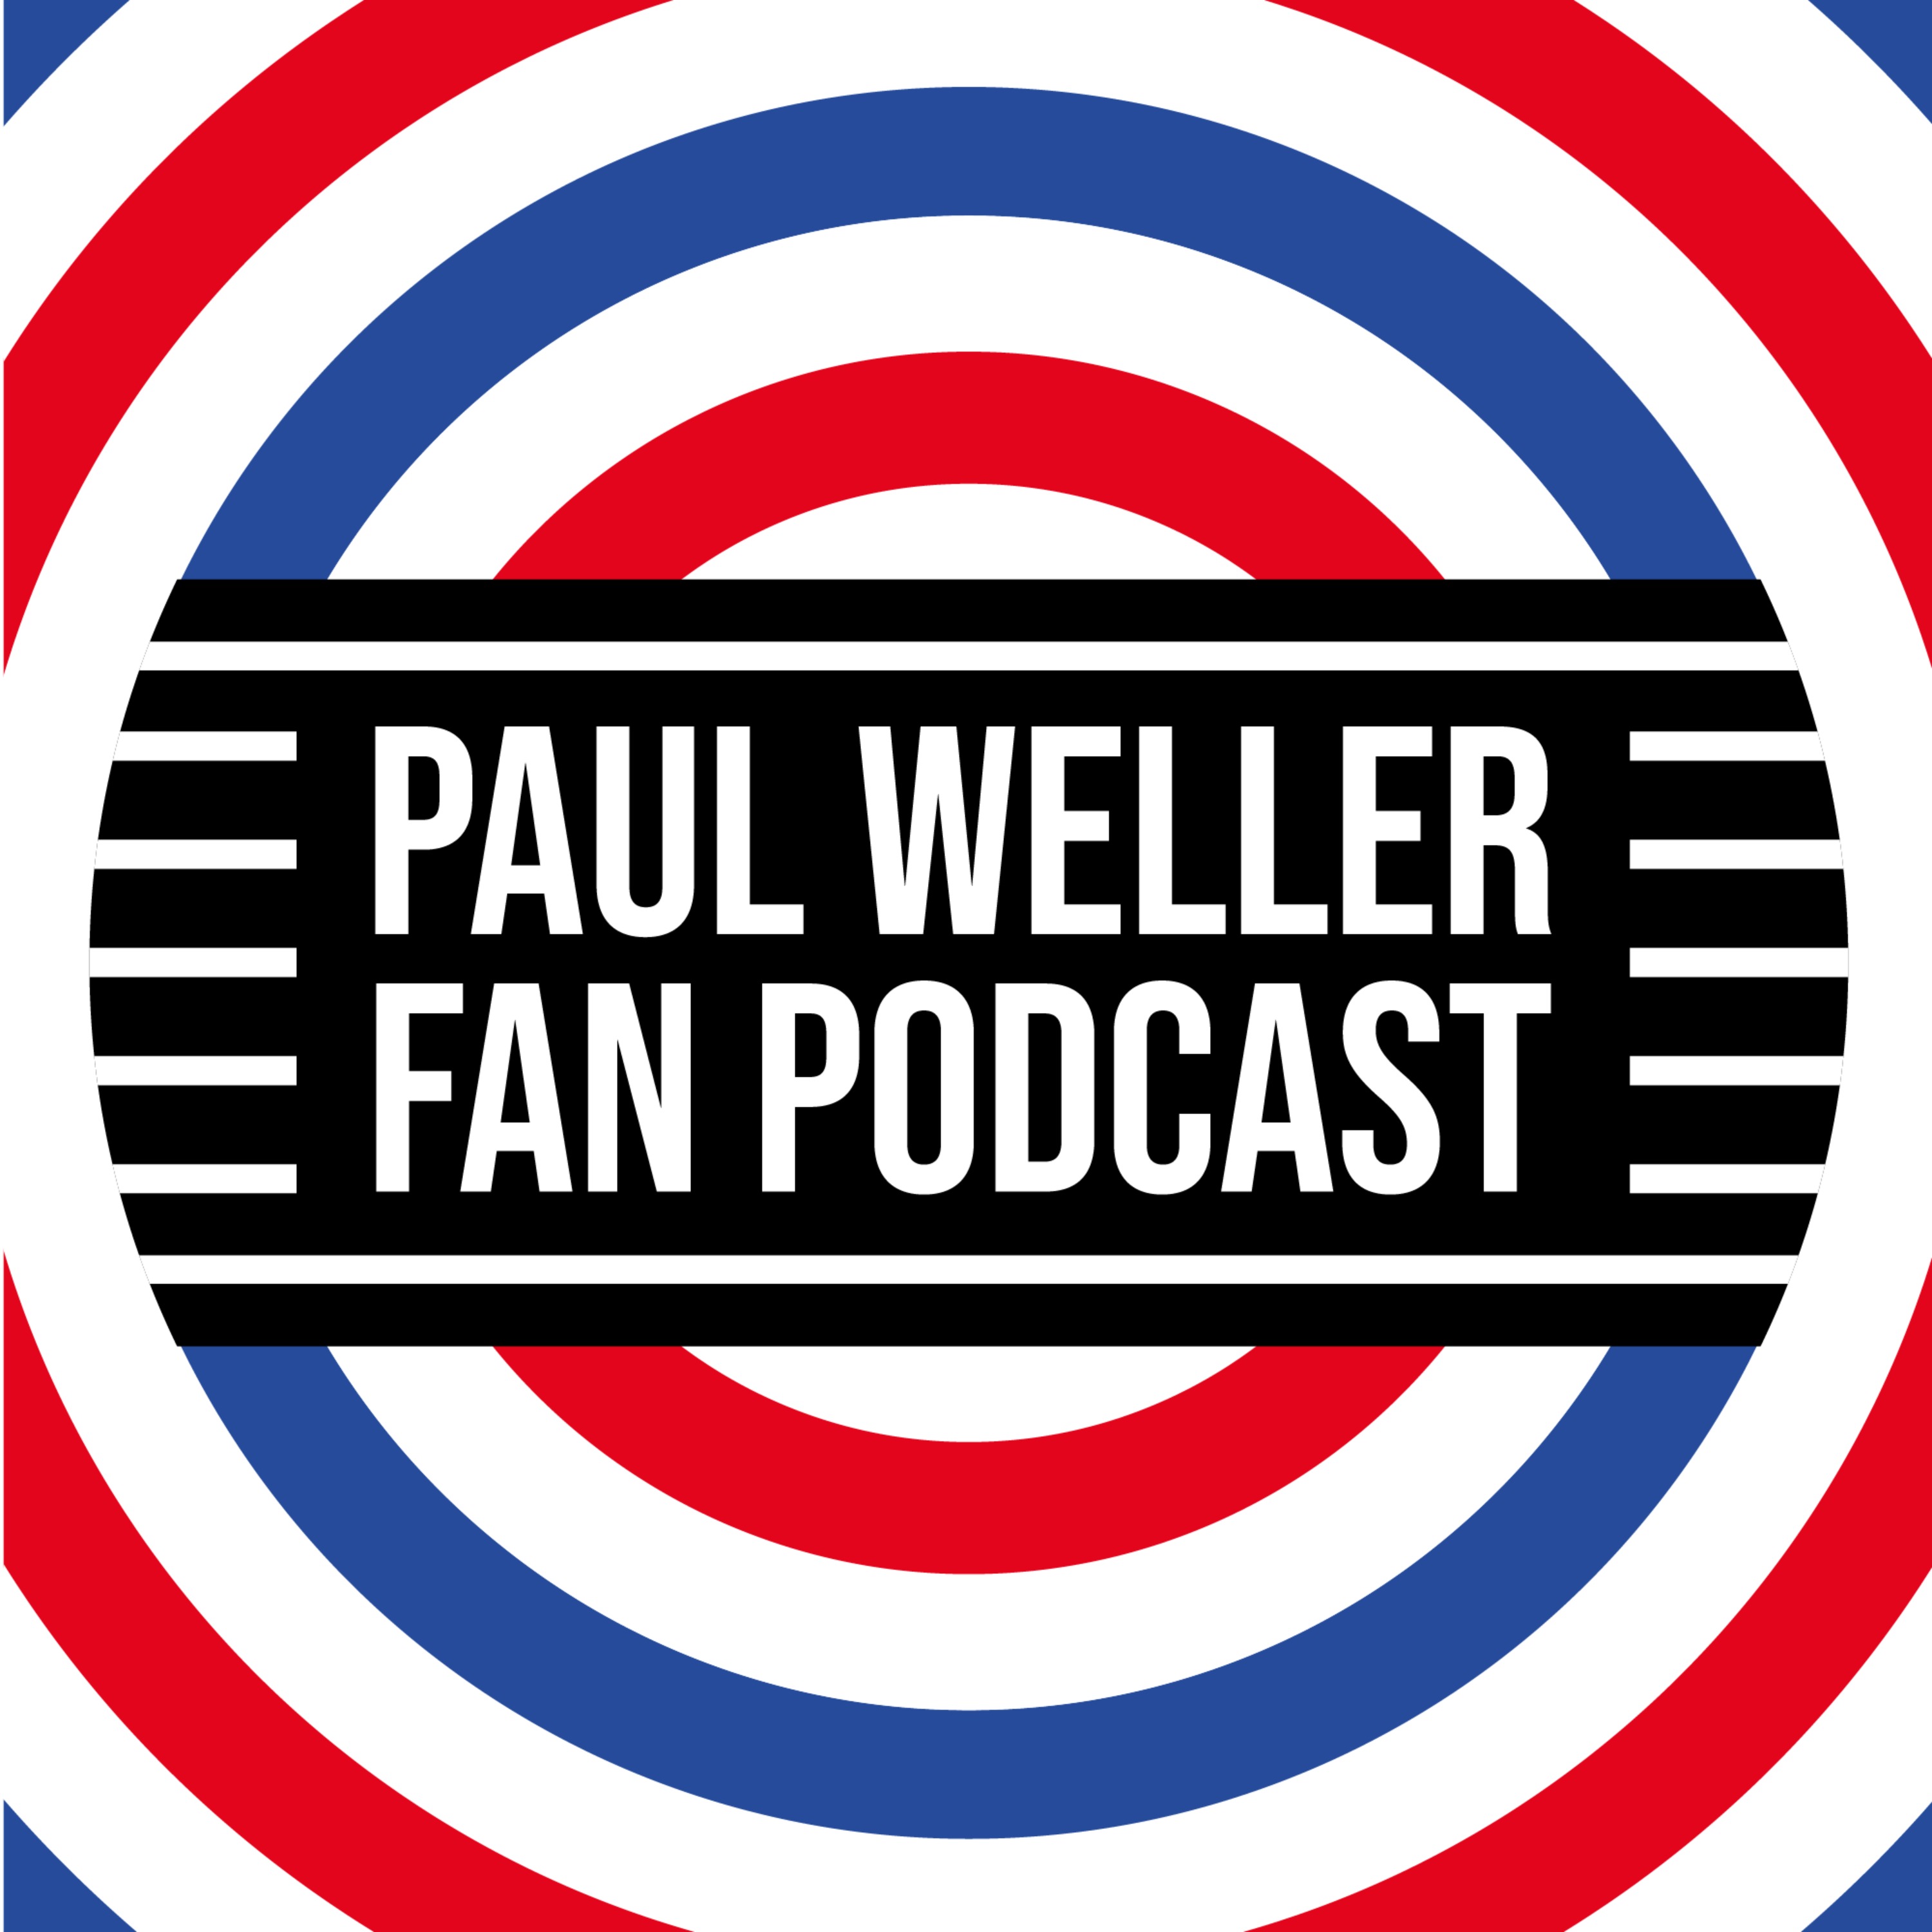 Paul Weller Interview - The Story of 66